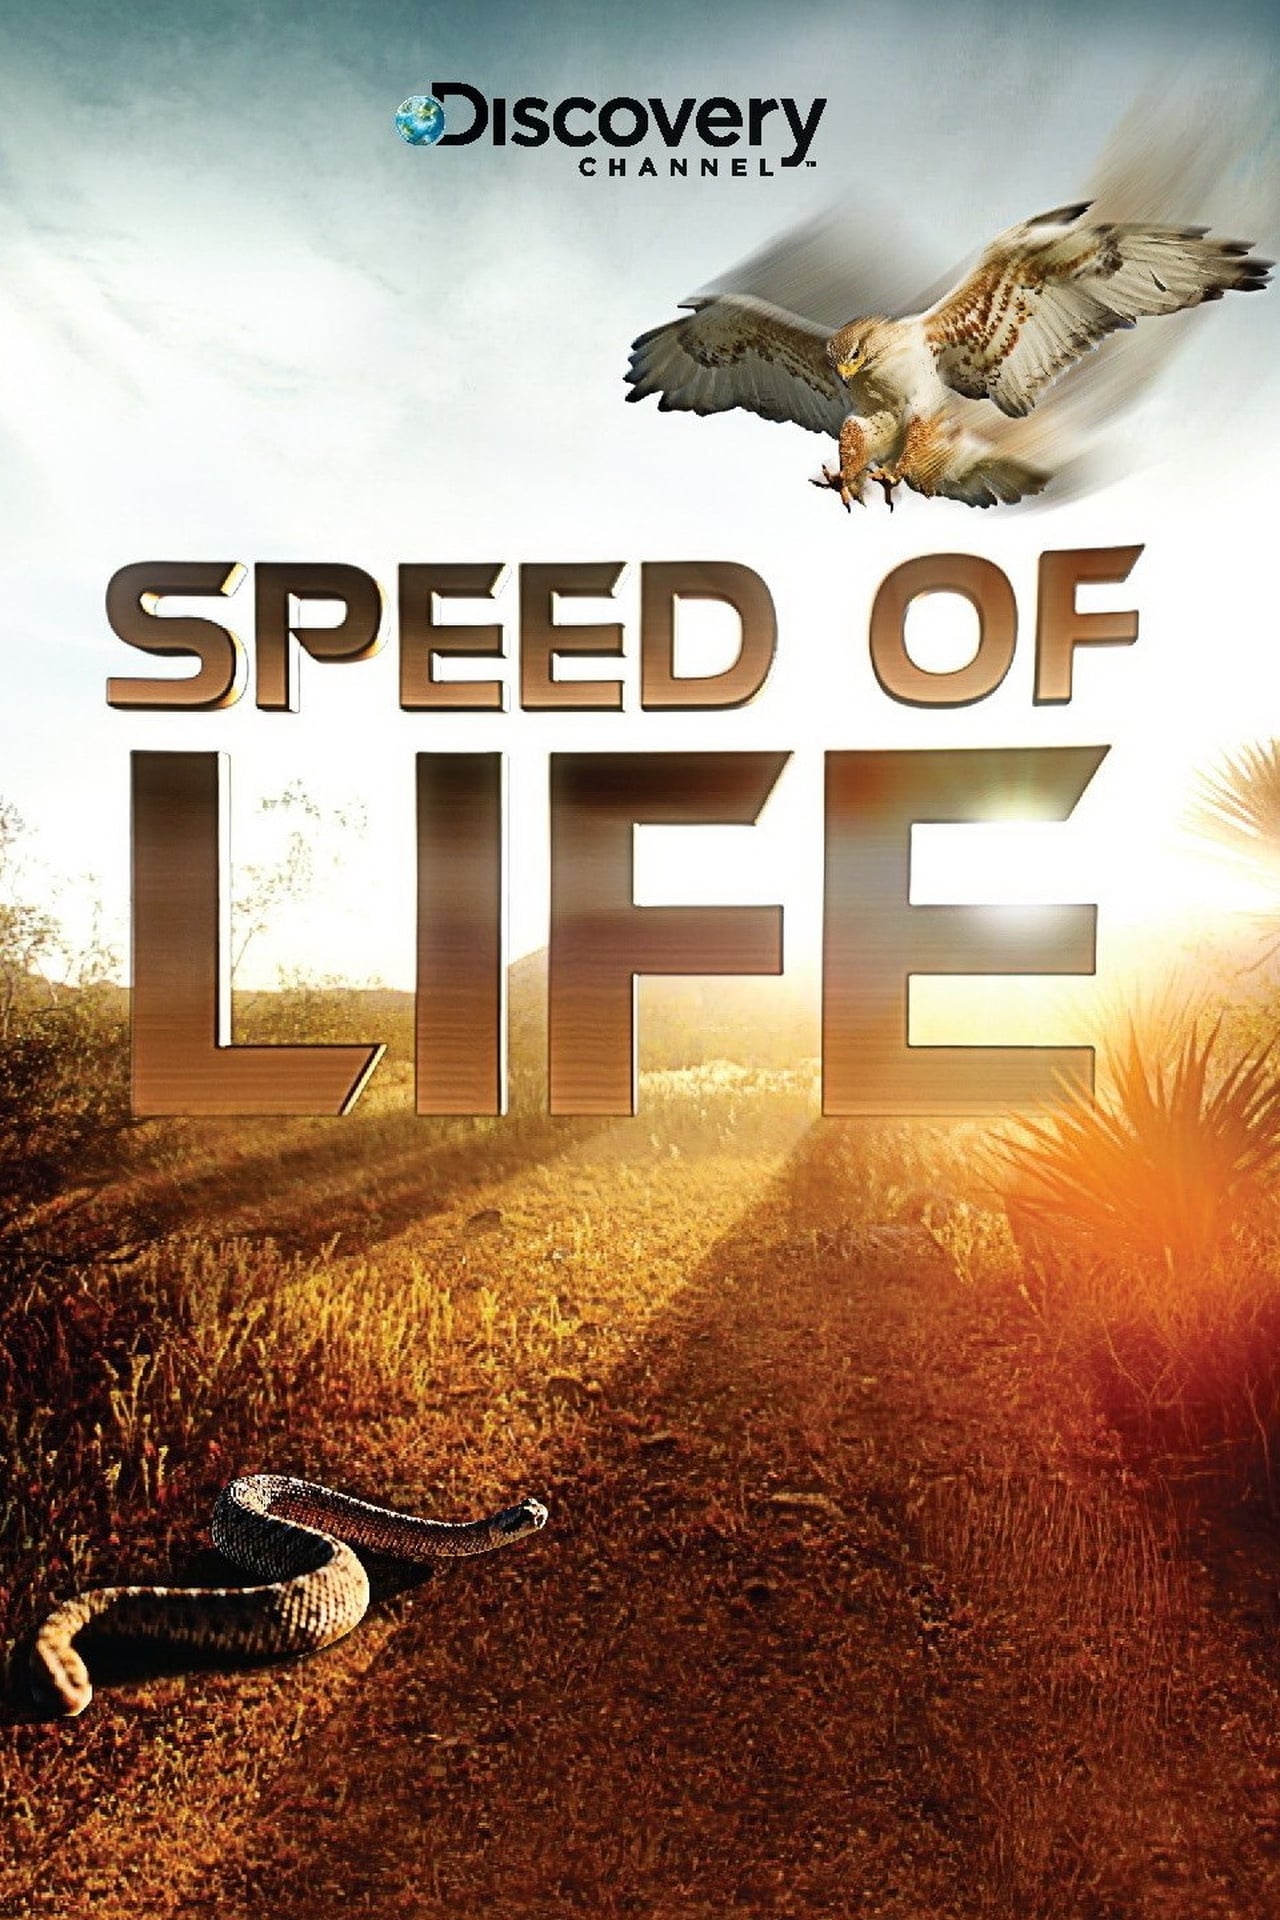 Speed of Life (2010) S1 EP2 Central American Killers 448Kbps 25Fps 48Khz 2.0Ch BluRay Turkish Audio TAC